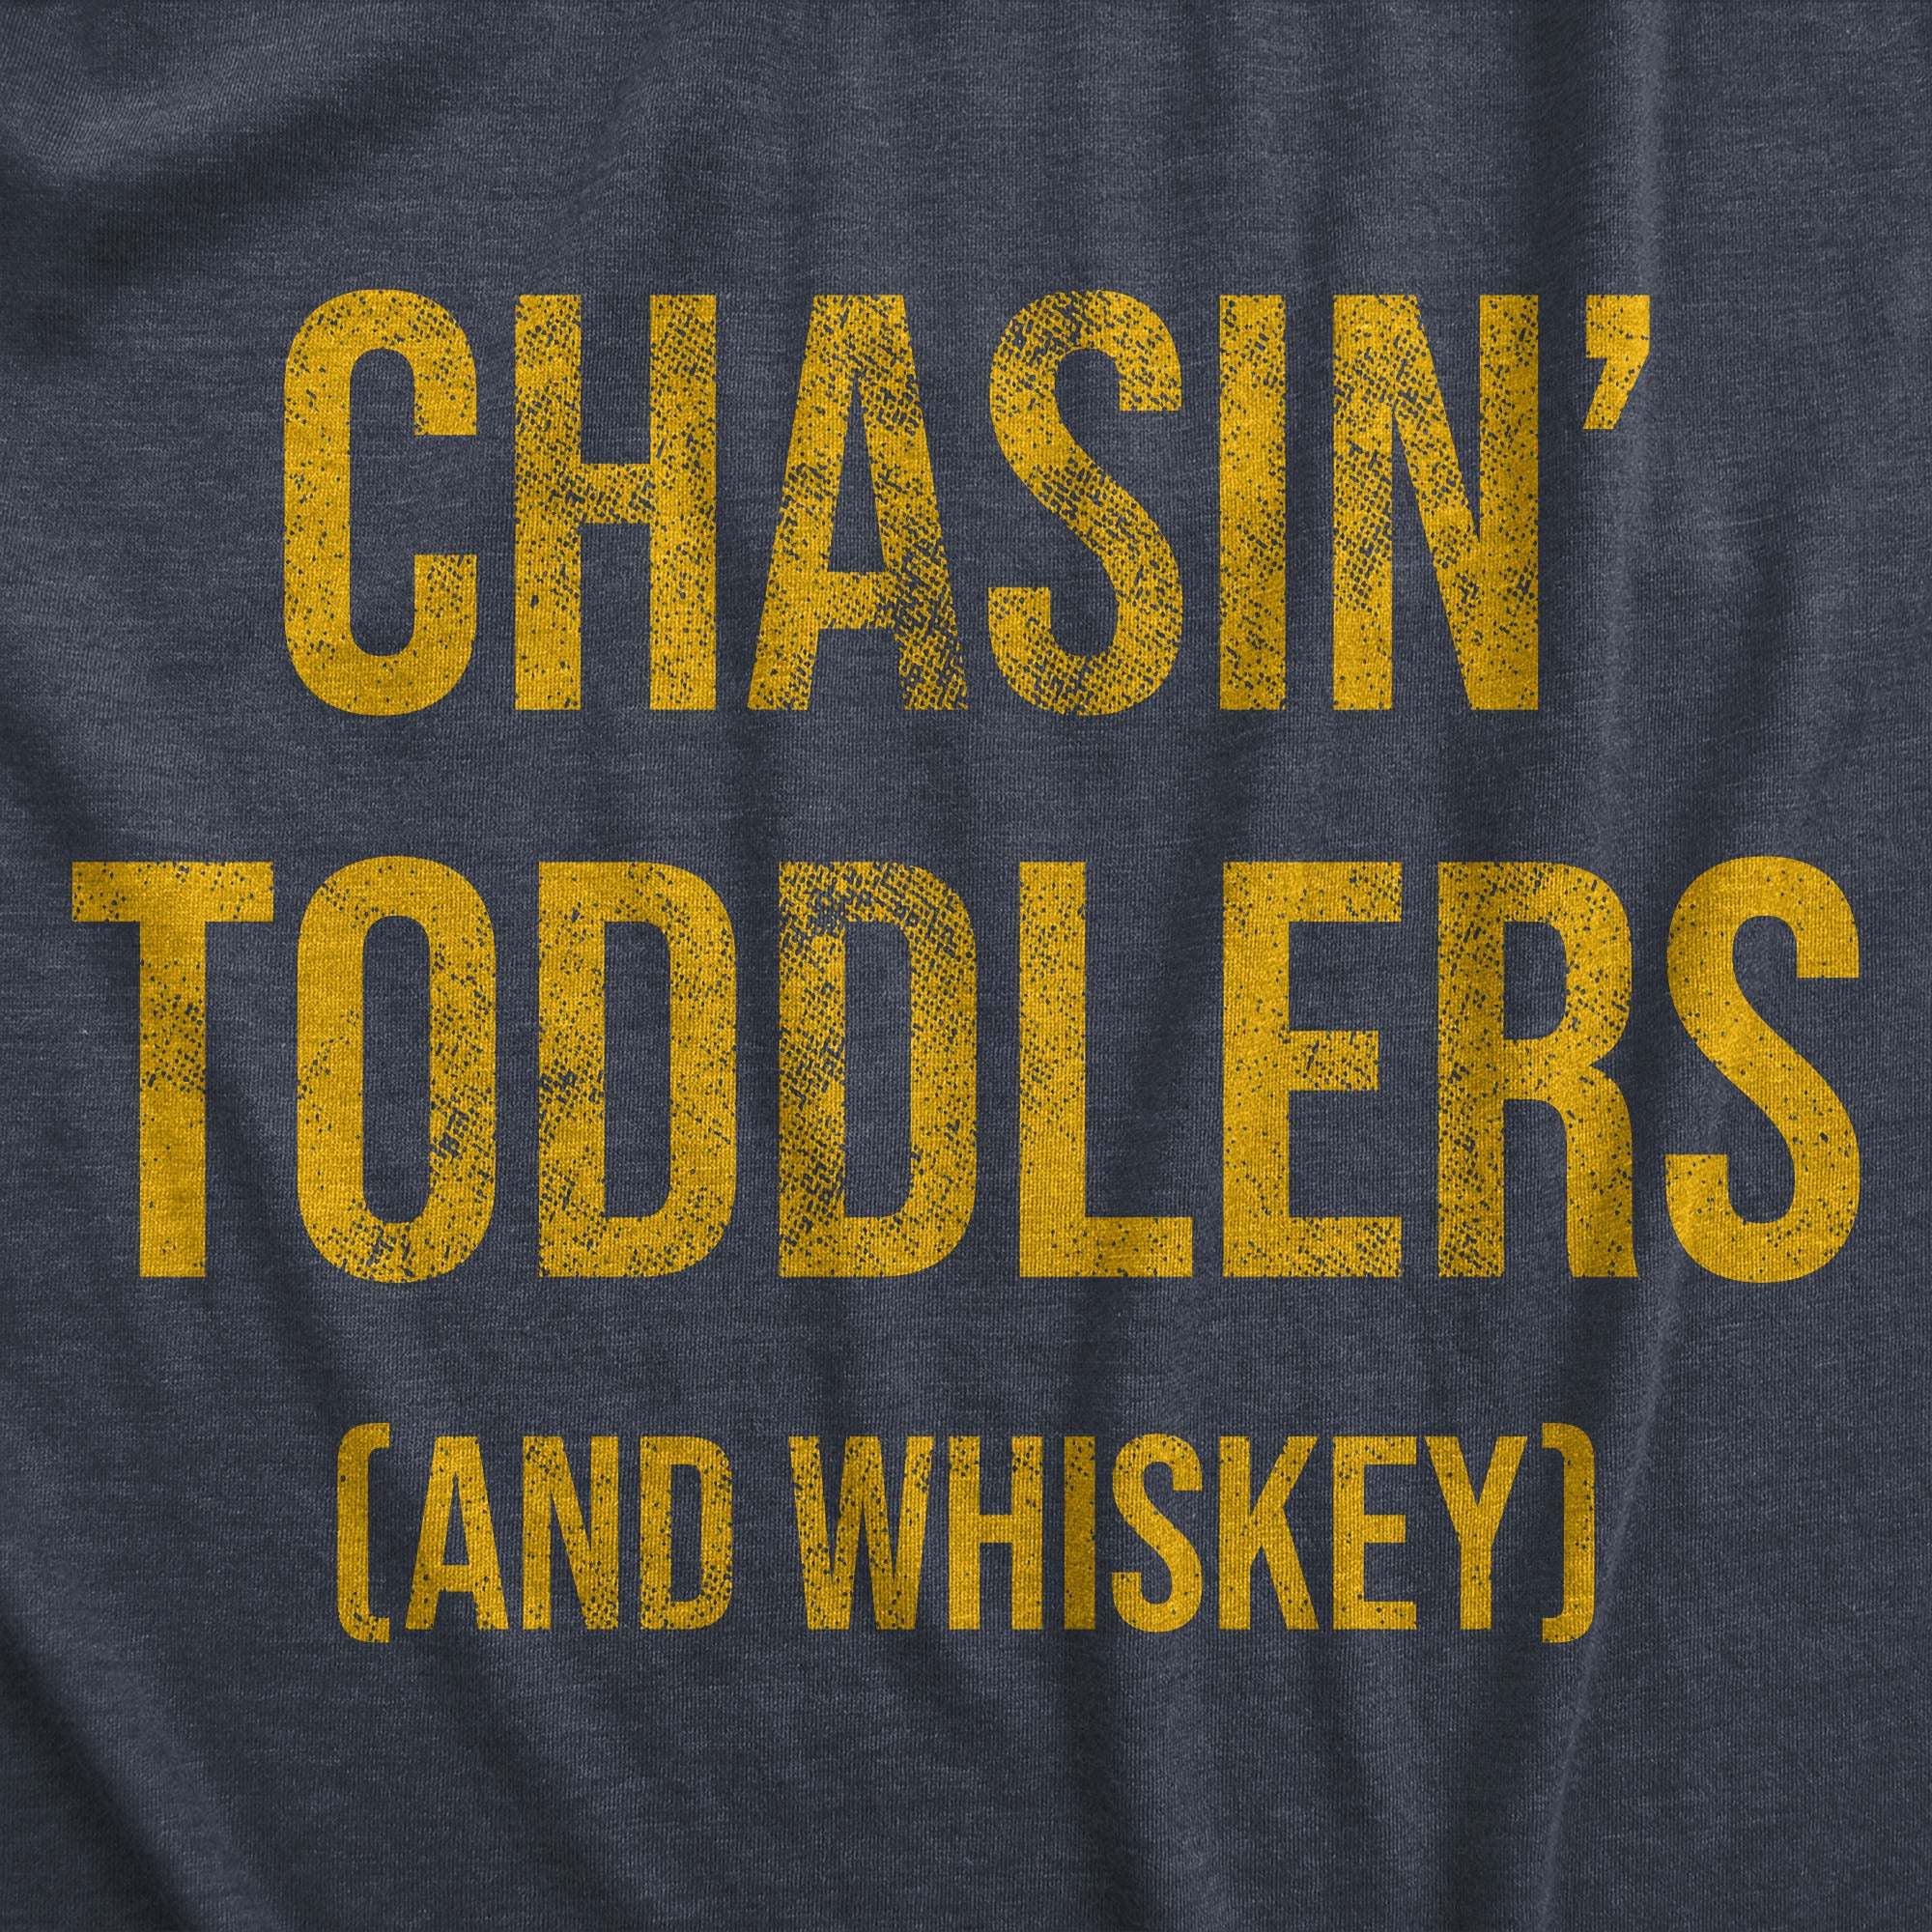 Funny Heather Navy - CHASIN Chasin Toddlers And Whiskey Mens T Shirt Nerdy Father's Day Drinking sarcastic Tee